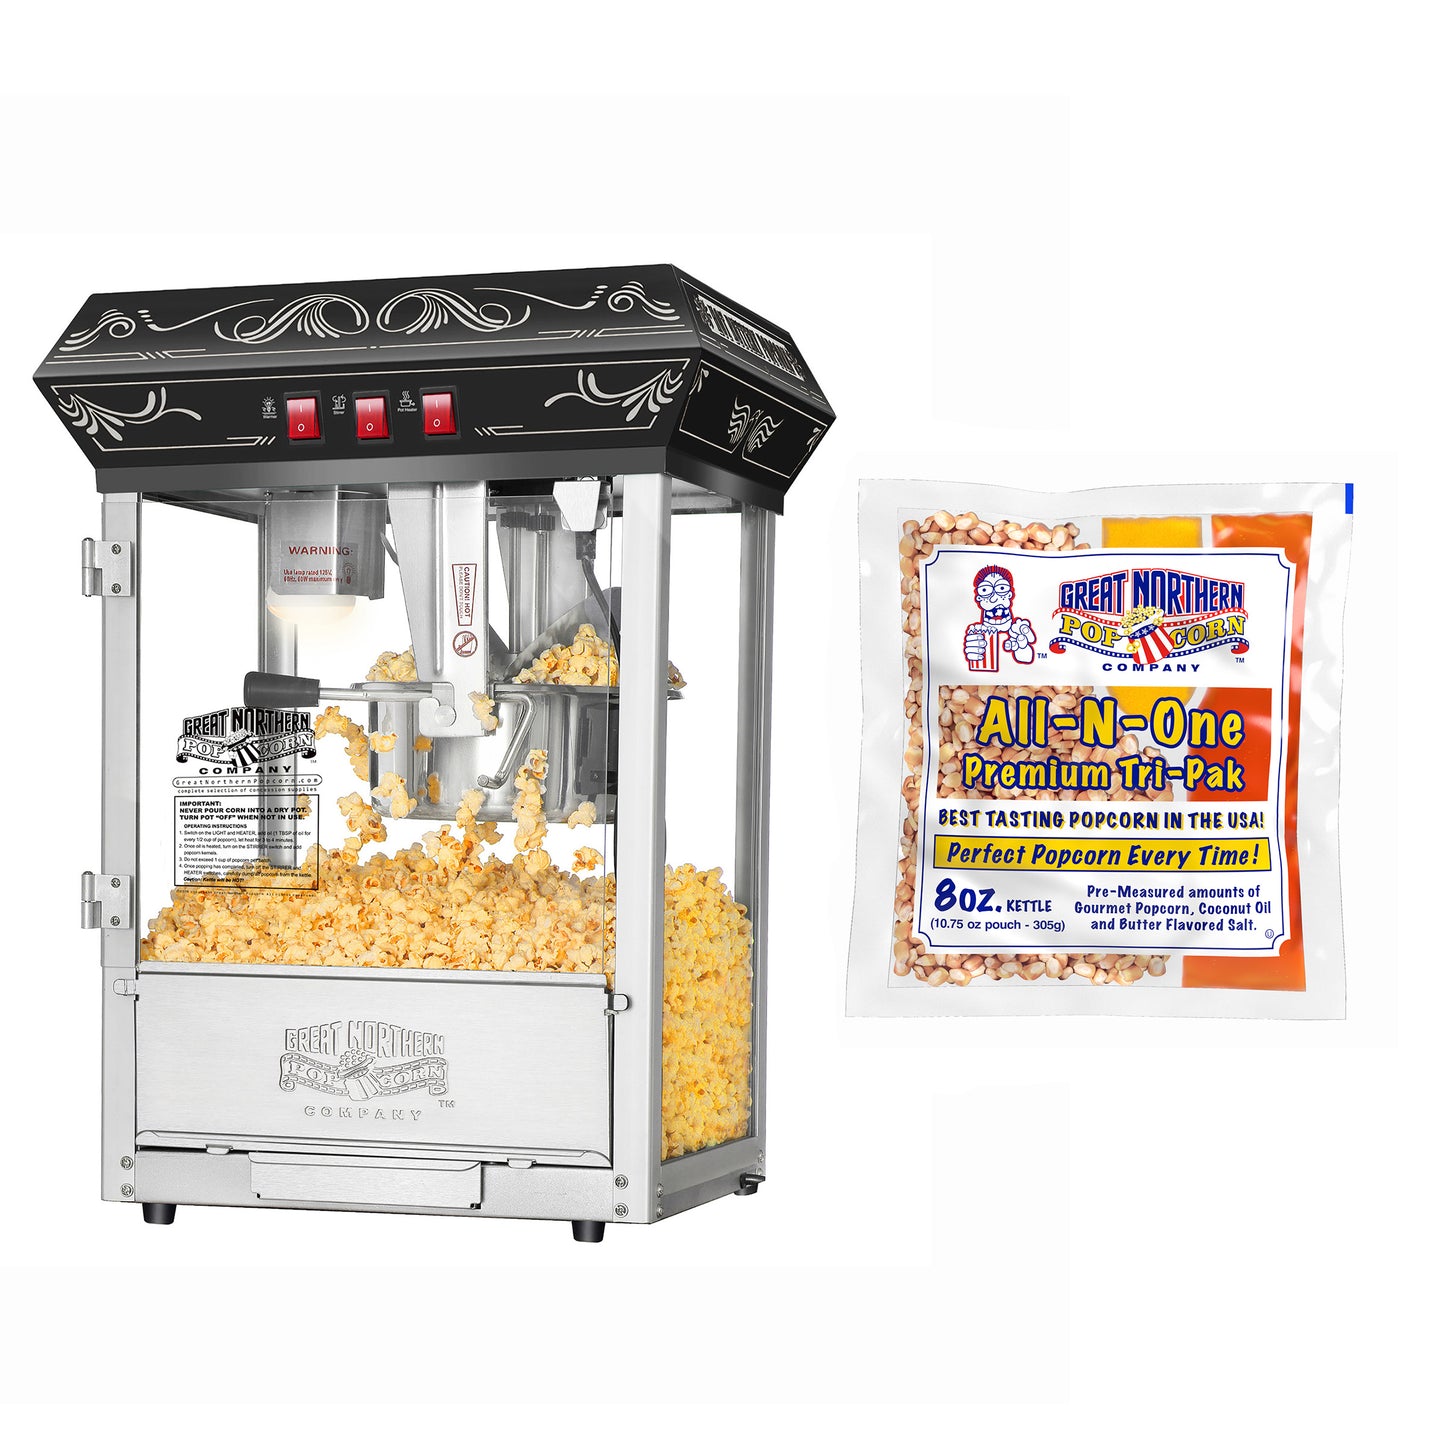 Good Time Countertop Popcorn Machine with 8 Ounce Kettle and 5 All-In-One Popcorn Packs - Black